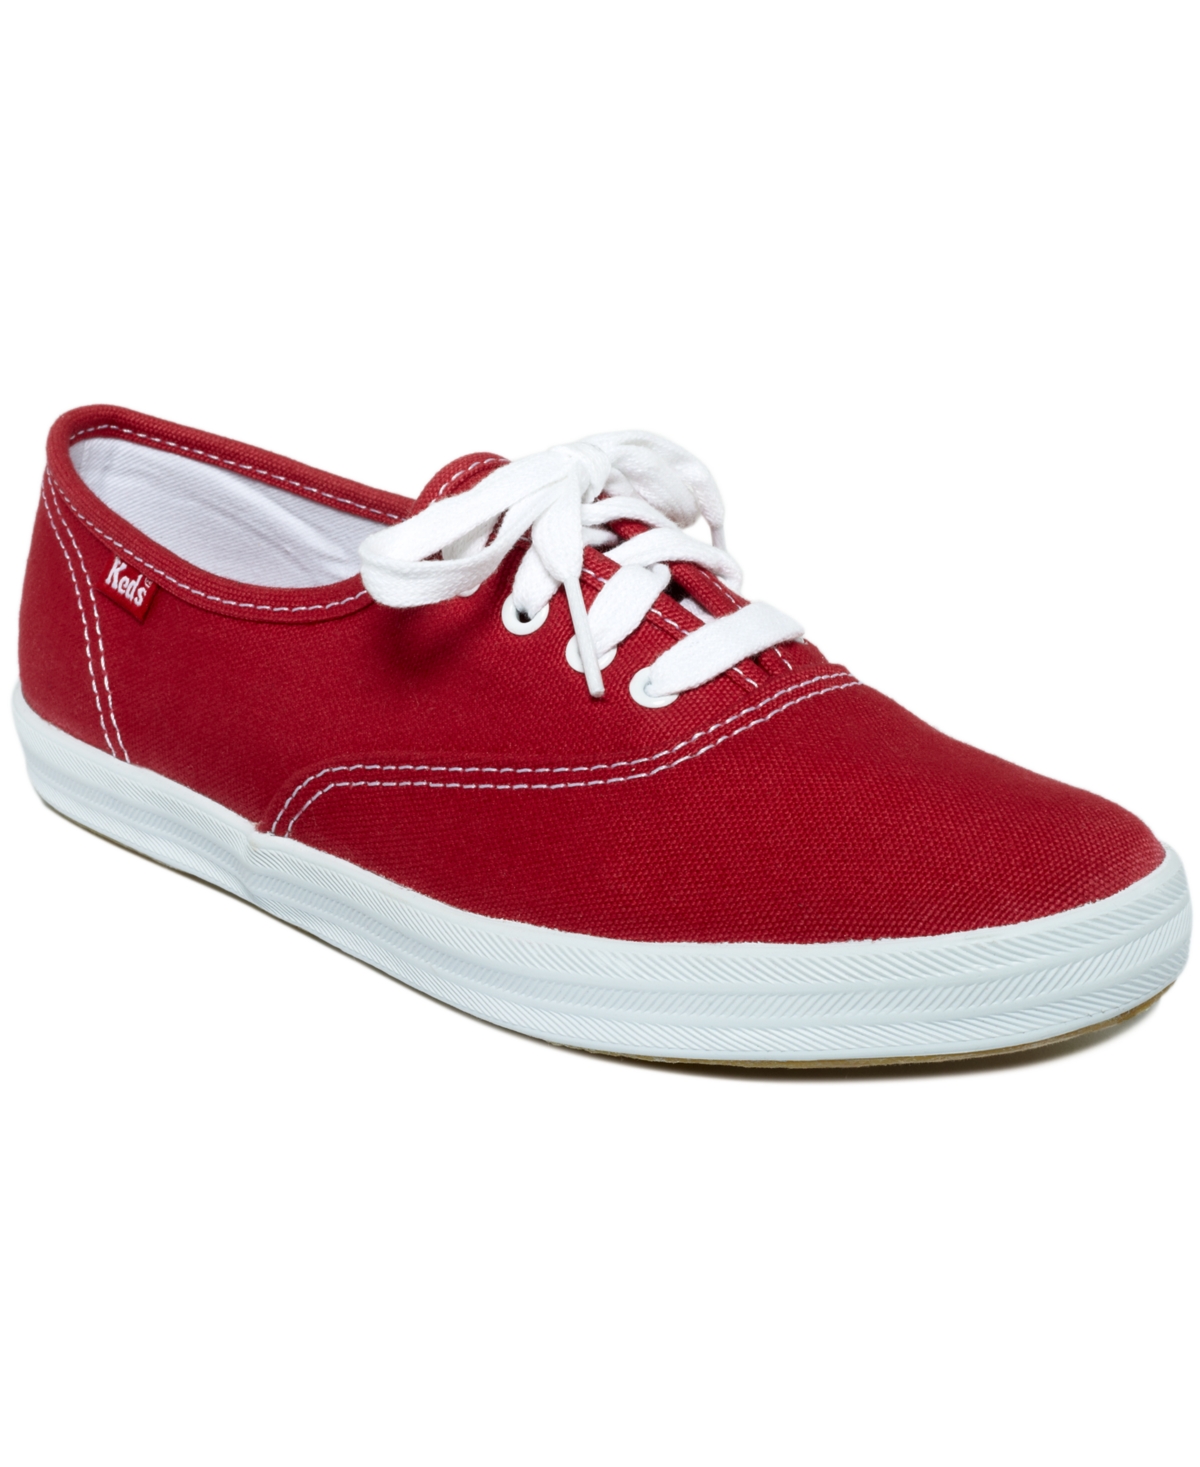 UPC 044209535765 product image for Keds Women's Champion Ortholite Lace-Up Oxford Fashion Sneakers from Finish Line | upcitemdb.com